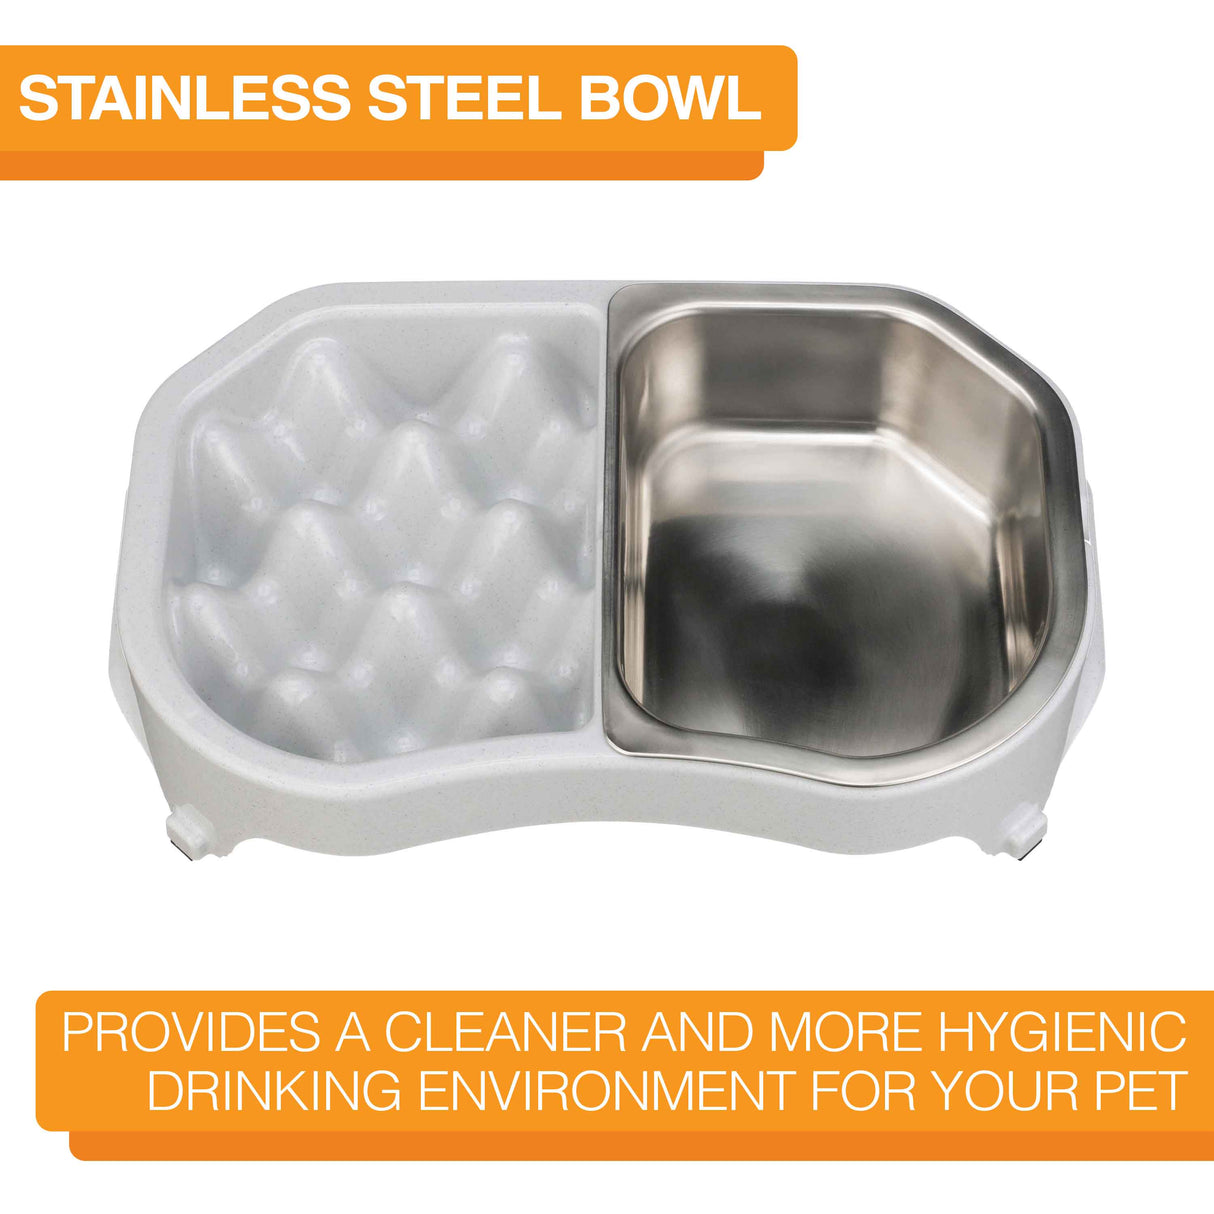 Double Diner with stainless steel insert is cleaner and more hygienic